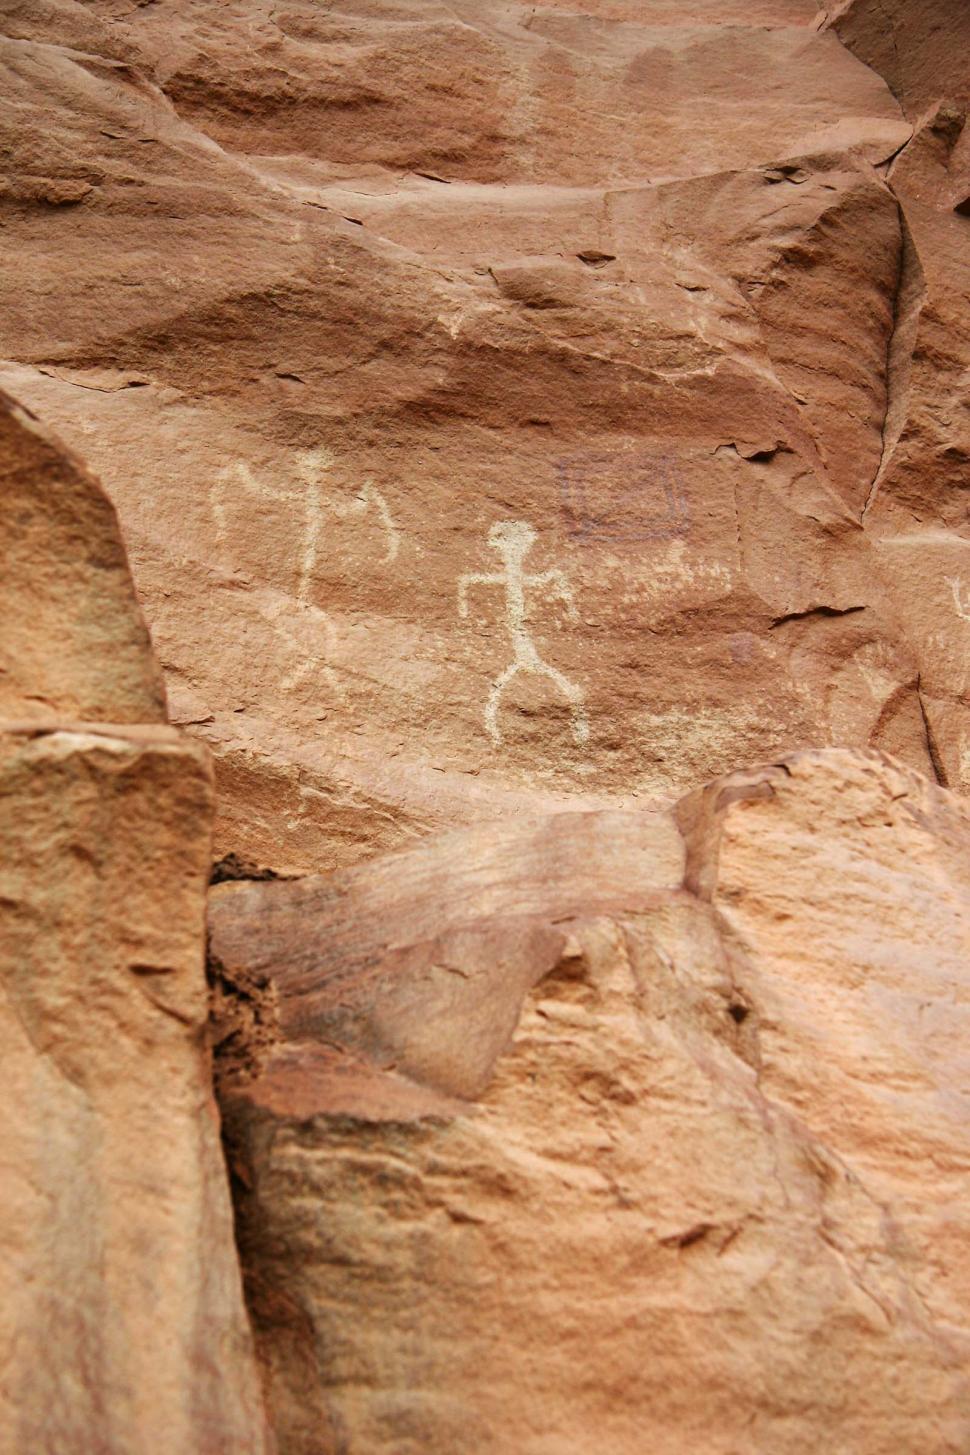 Free Image of cliff cliffs canyon de chelly chelly canyon de arizona indian native american monument national navajo southwest ancient carving rock petroglyph 